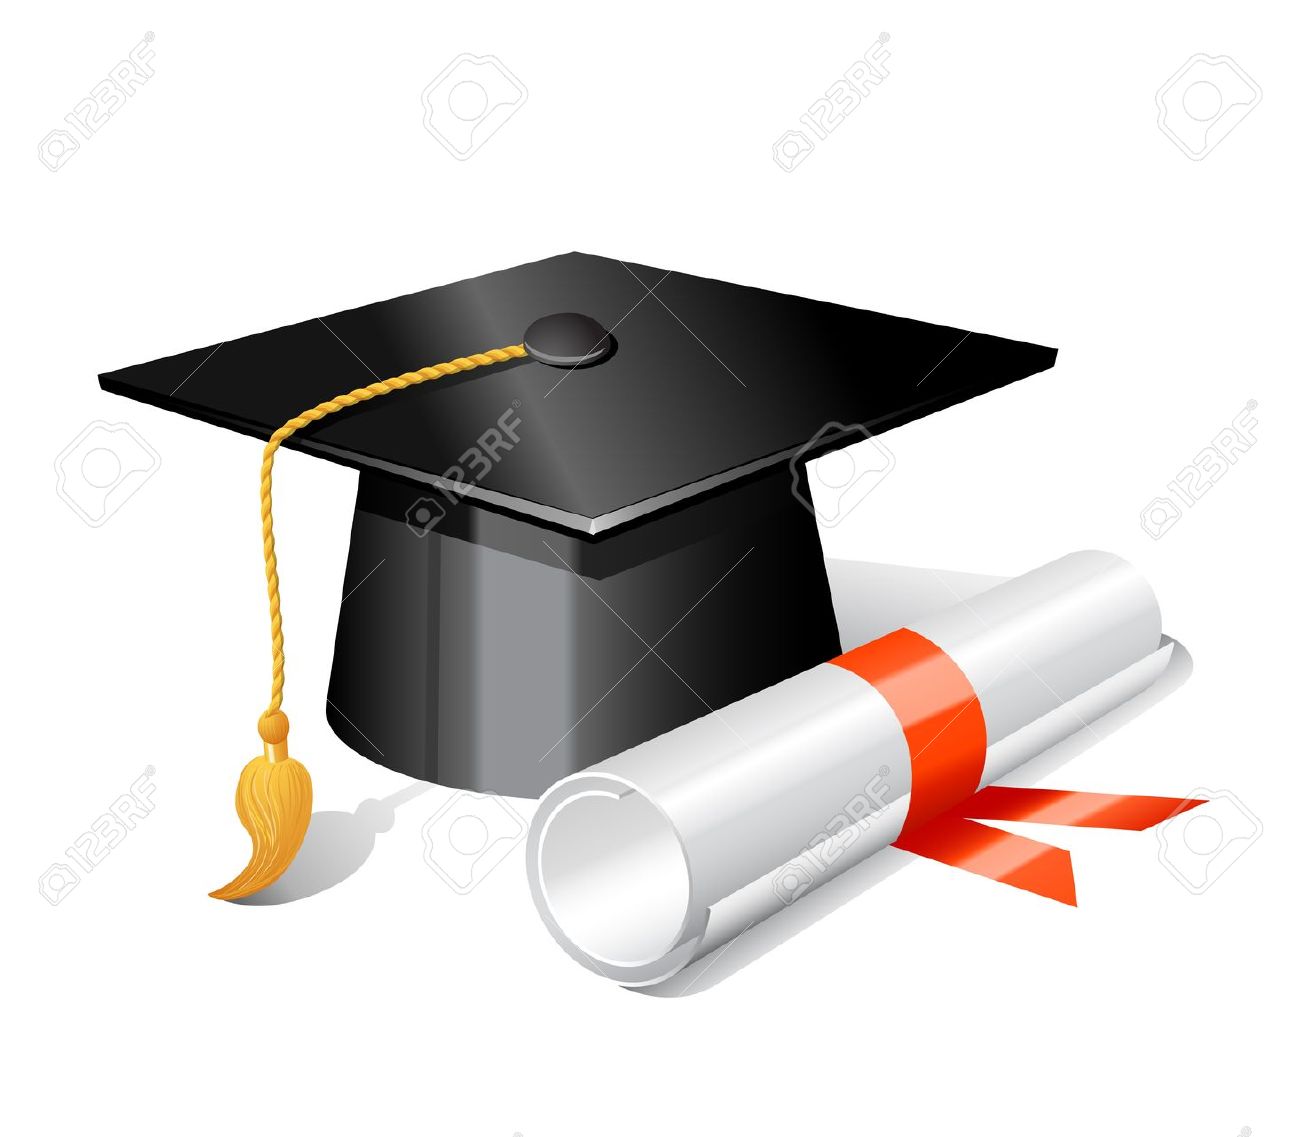 Clipart of graduation cap and scroll clipartfest